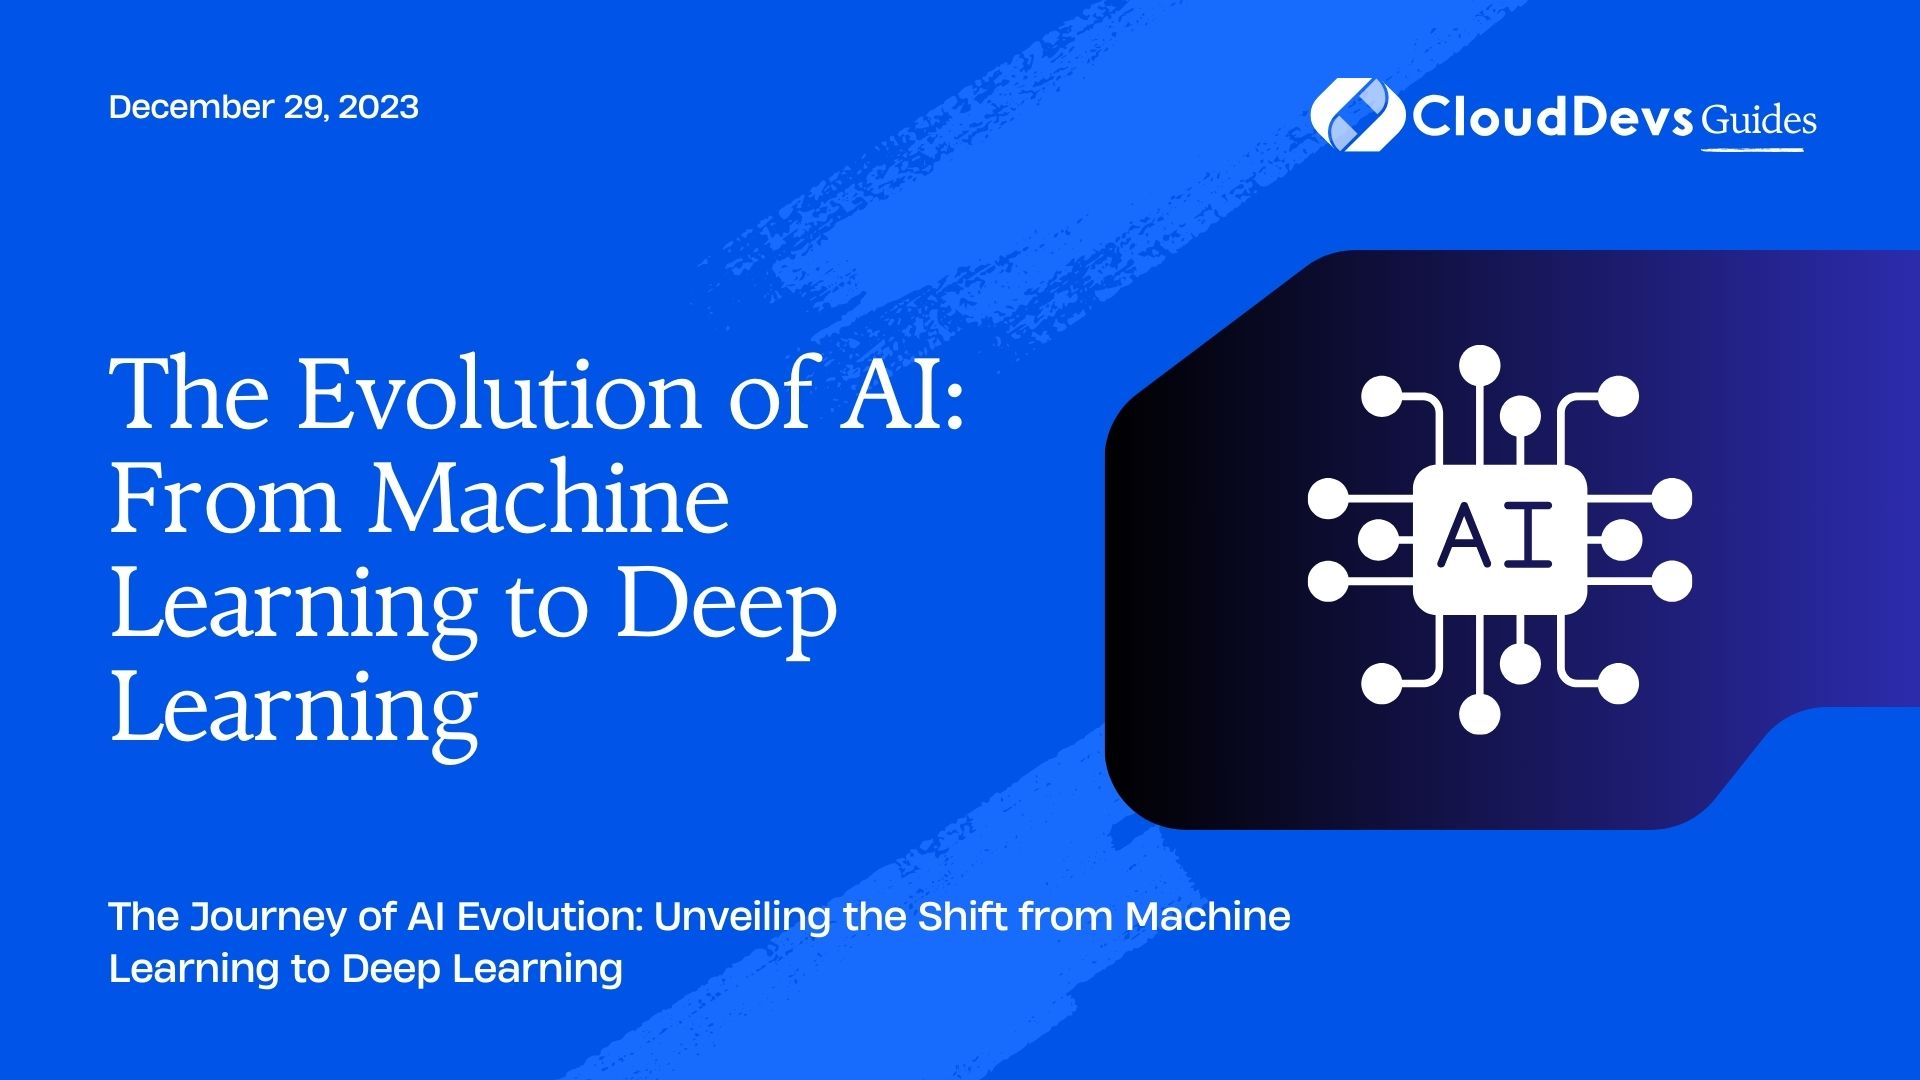 The Evolution of AI: From Machine Learning to Deep Learning